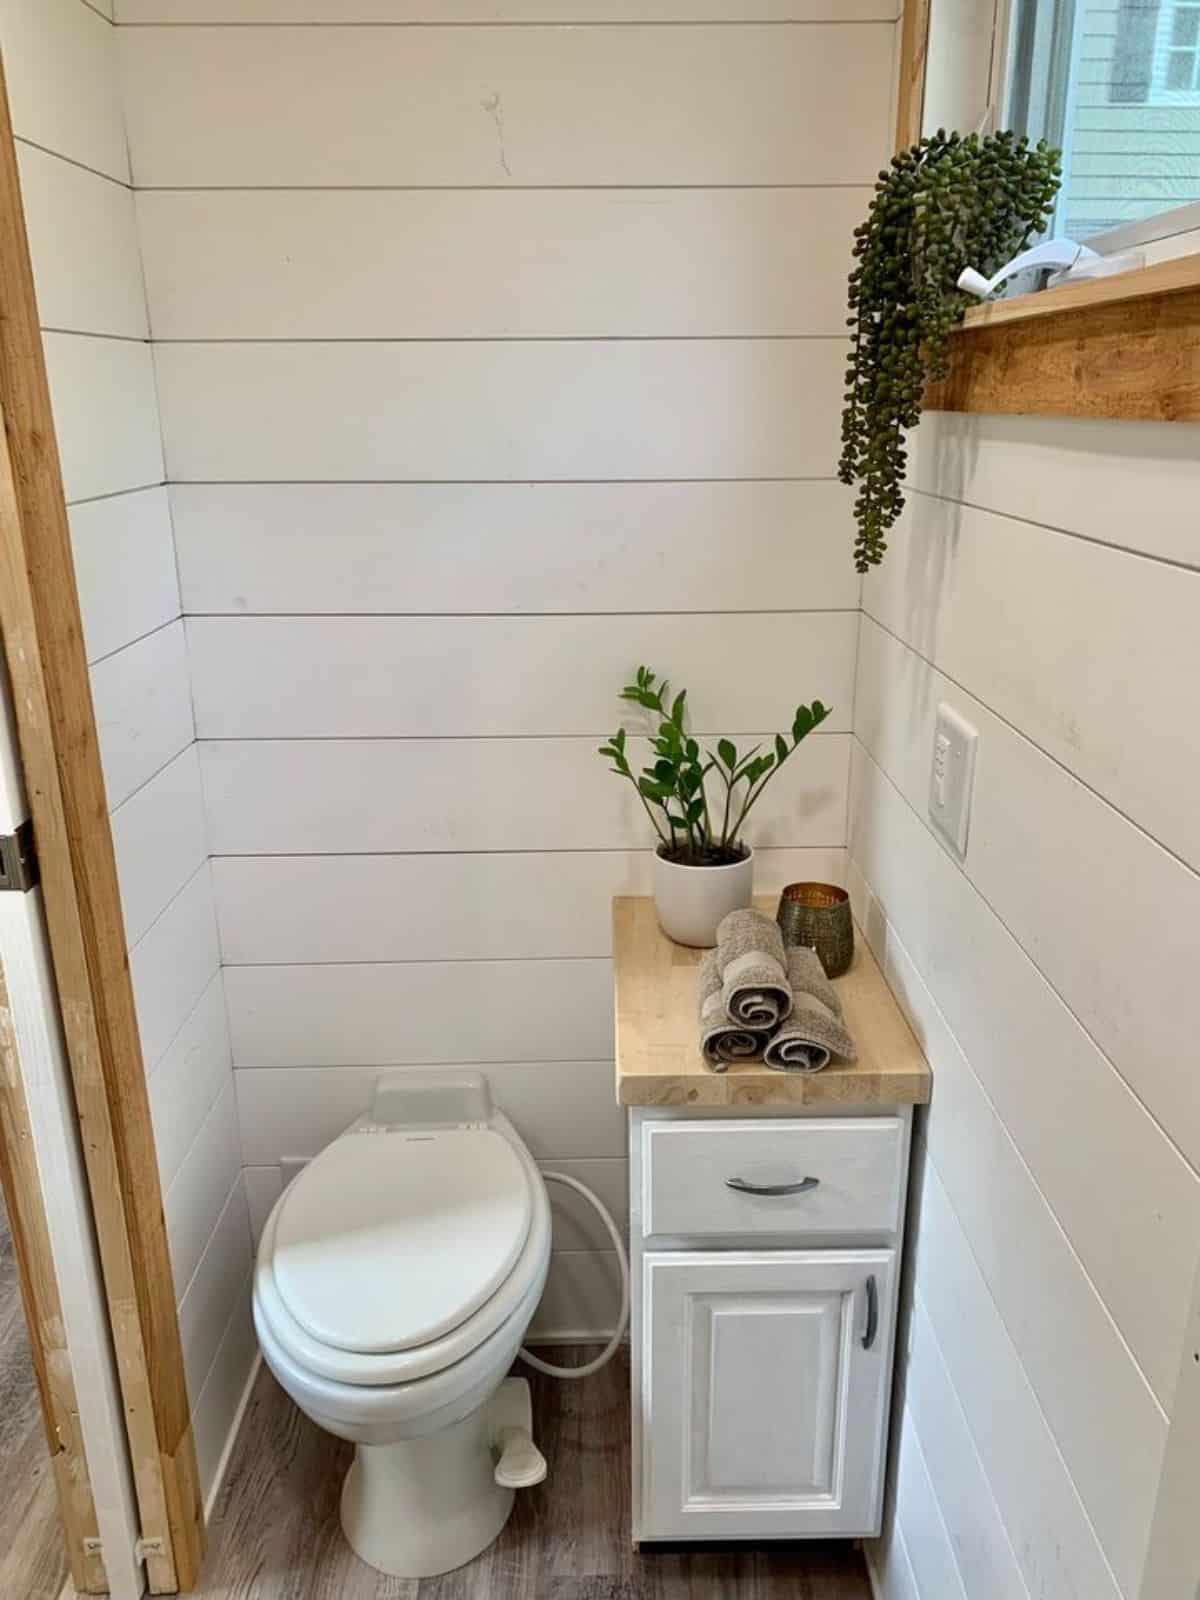 Composting toilet and storage in bathroom